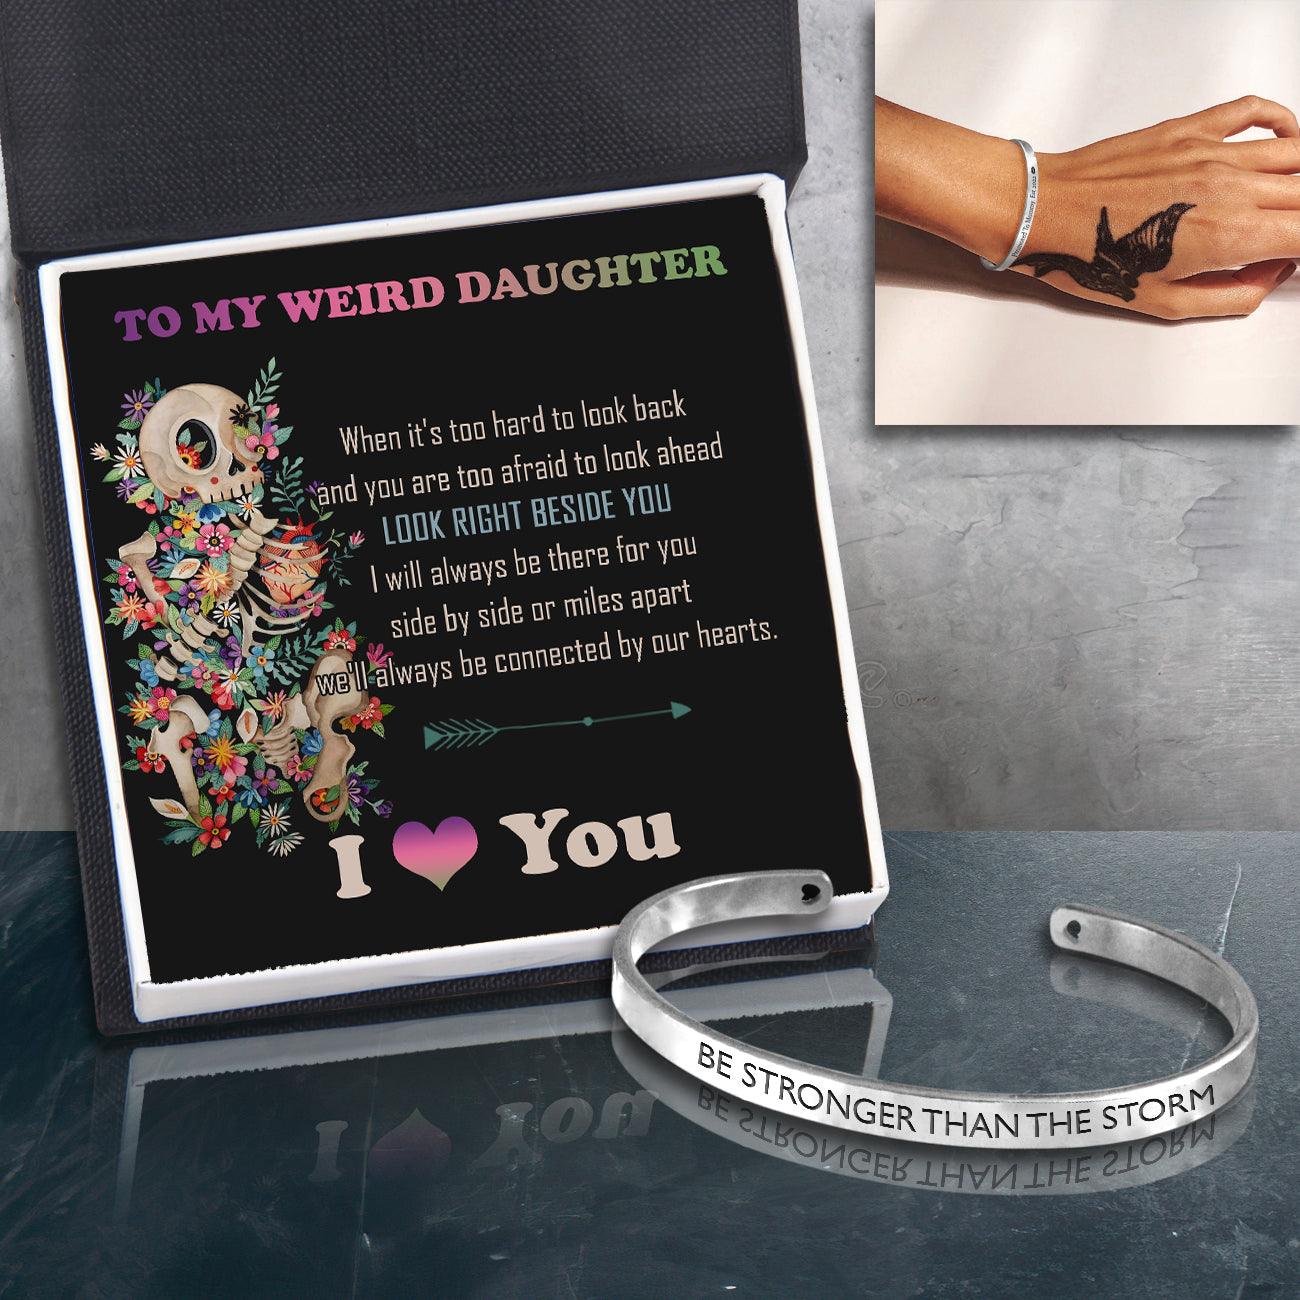 Skull Bracelet - Skull - To My Weird Daughter - Look Right Beside You - Augbzf17014 - Gifts Holder